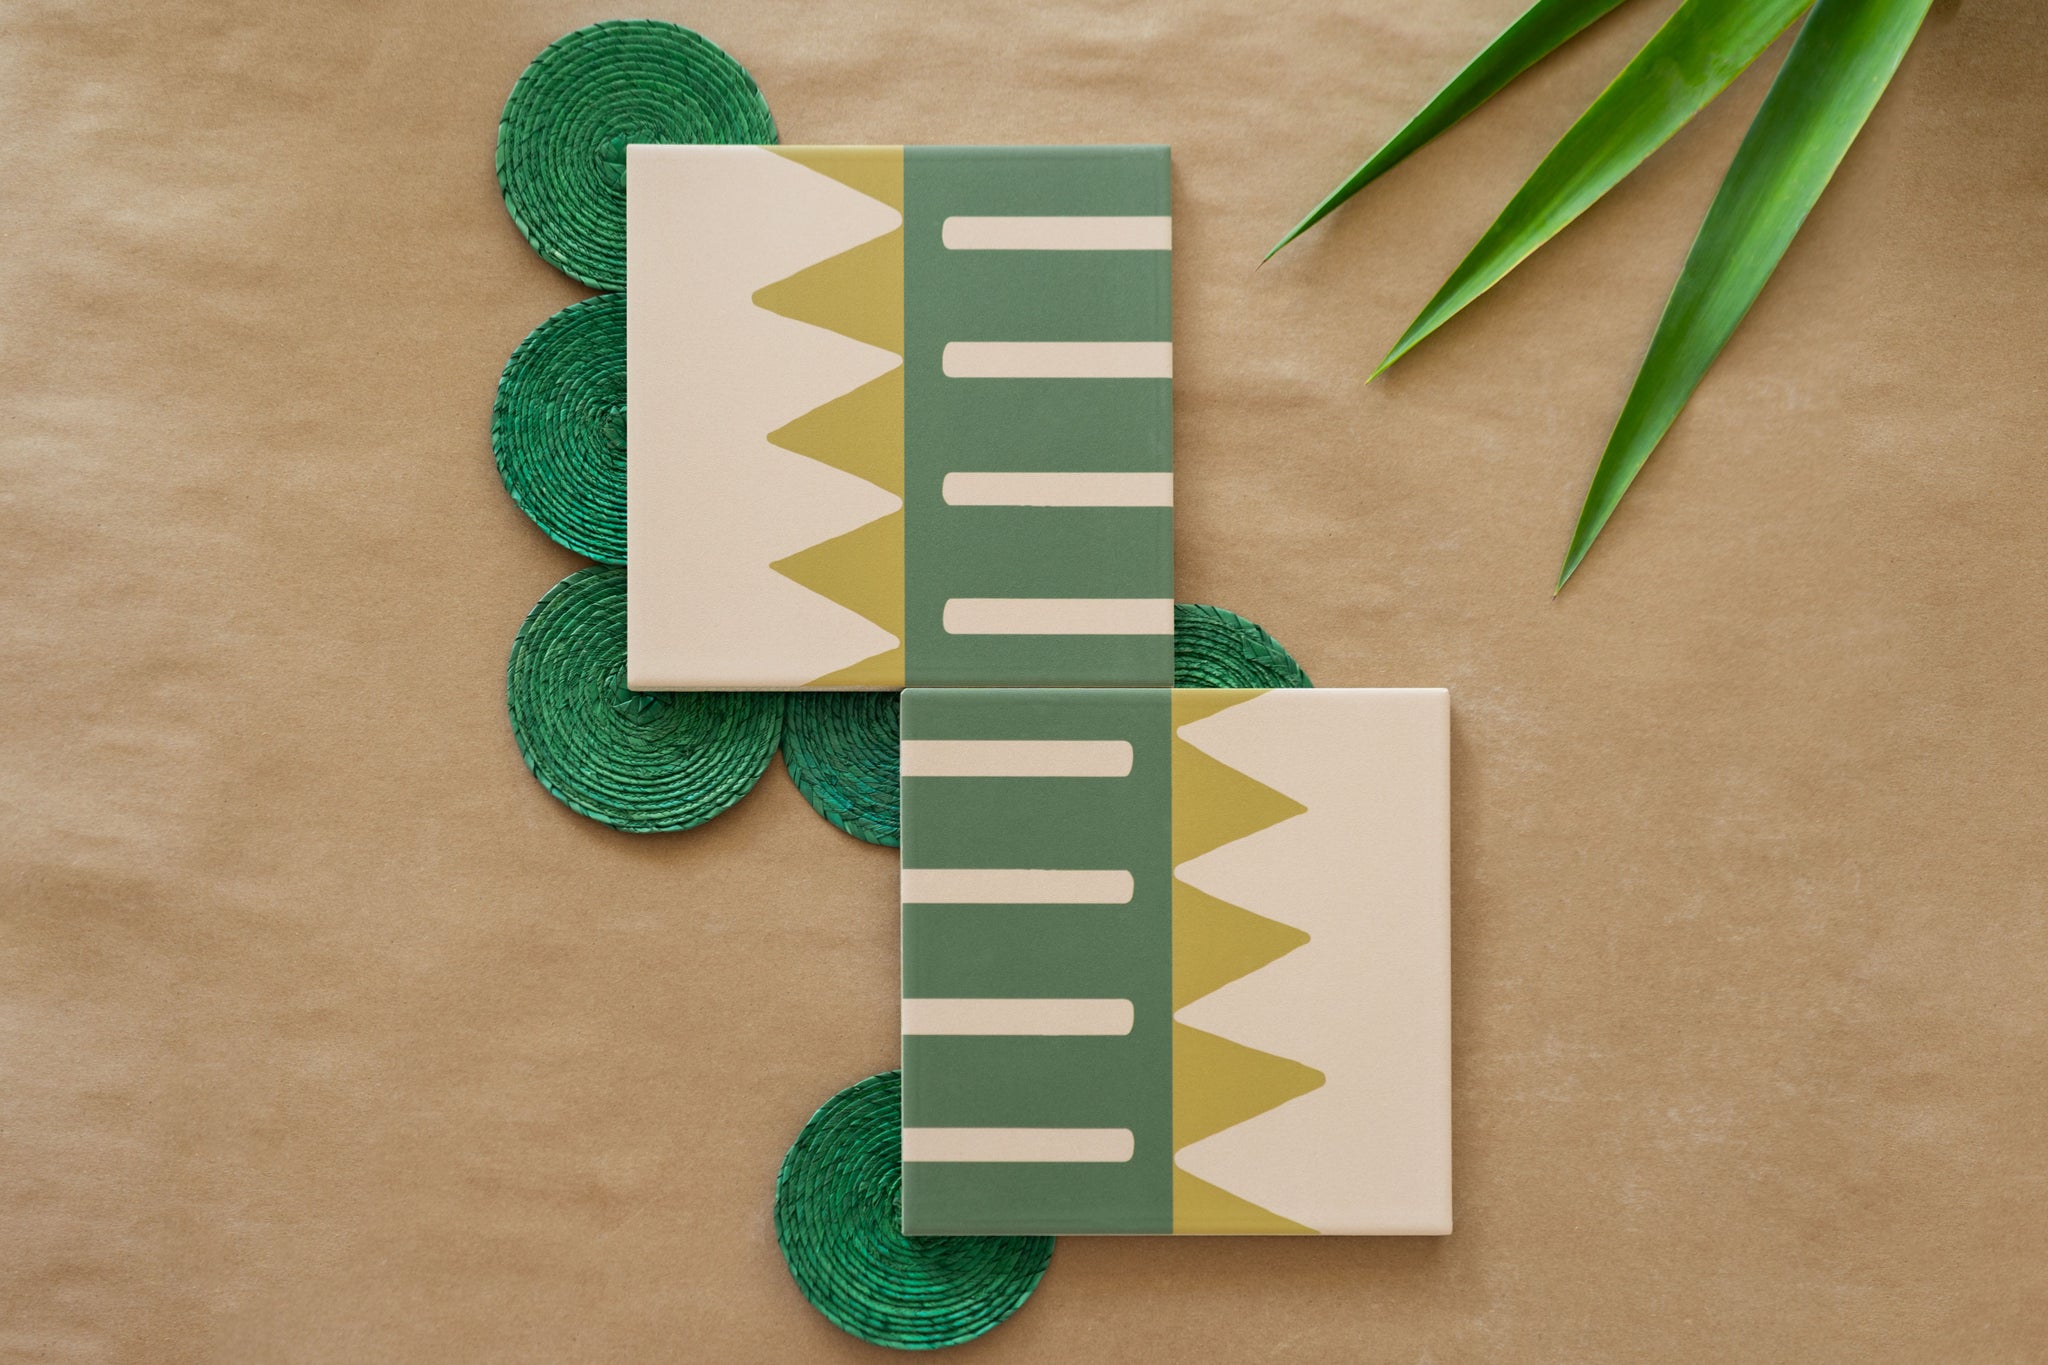 Patterned green and white tile